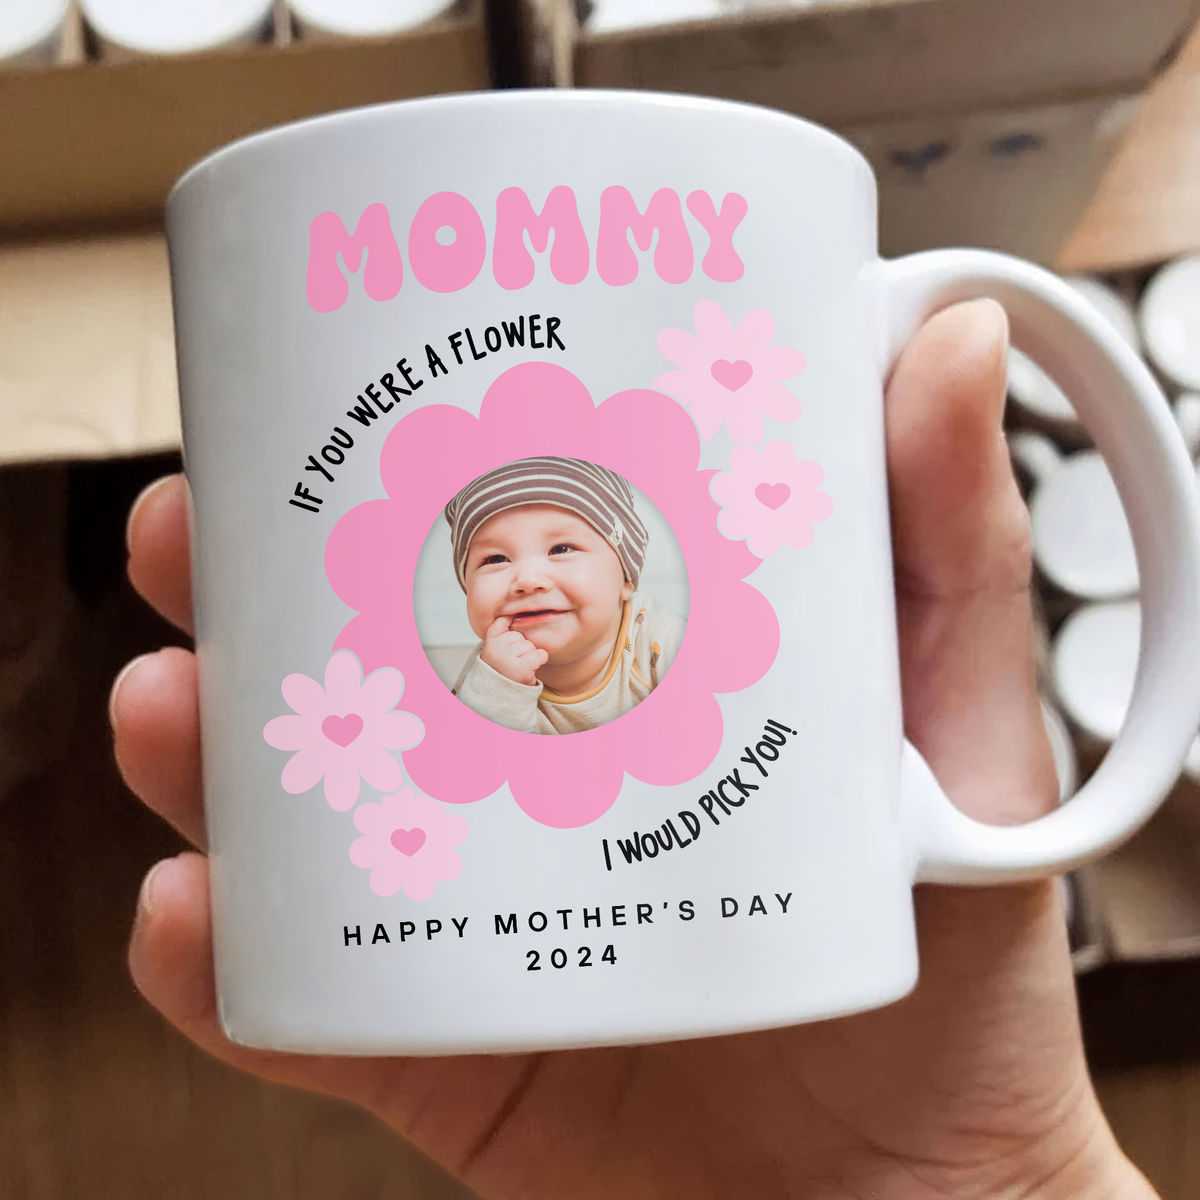 Photo Mug - Mother's Day - Photo Upload Mug - Mommy If You Were A Flower I Would Pick You. Happy Mother's Day 2024_2